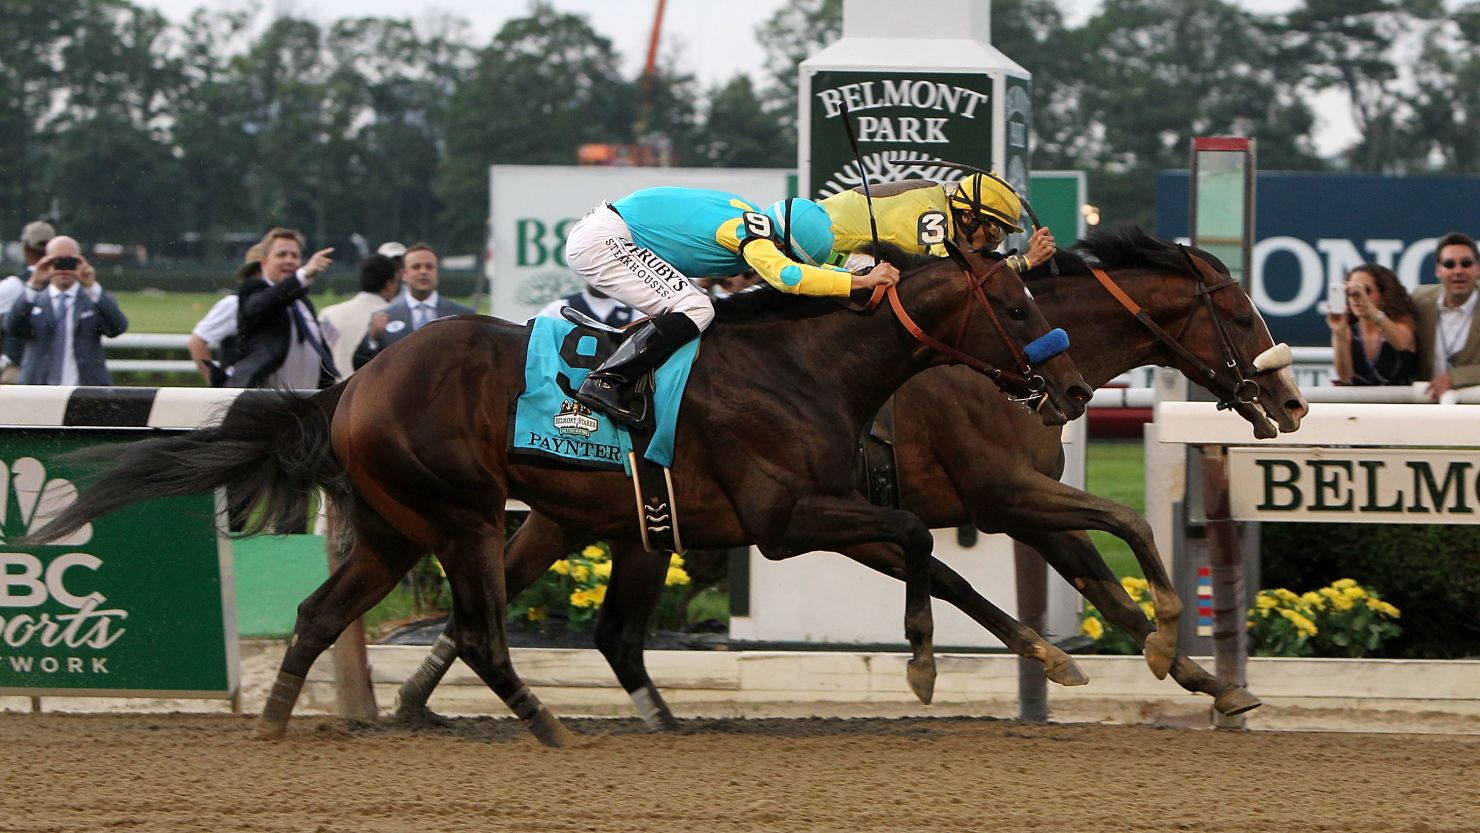 Union Rags, ridden by John Velazquez edges past Paynter, ridden by Mike Smith, to win the Belmont Stakes.